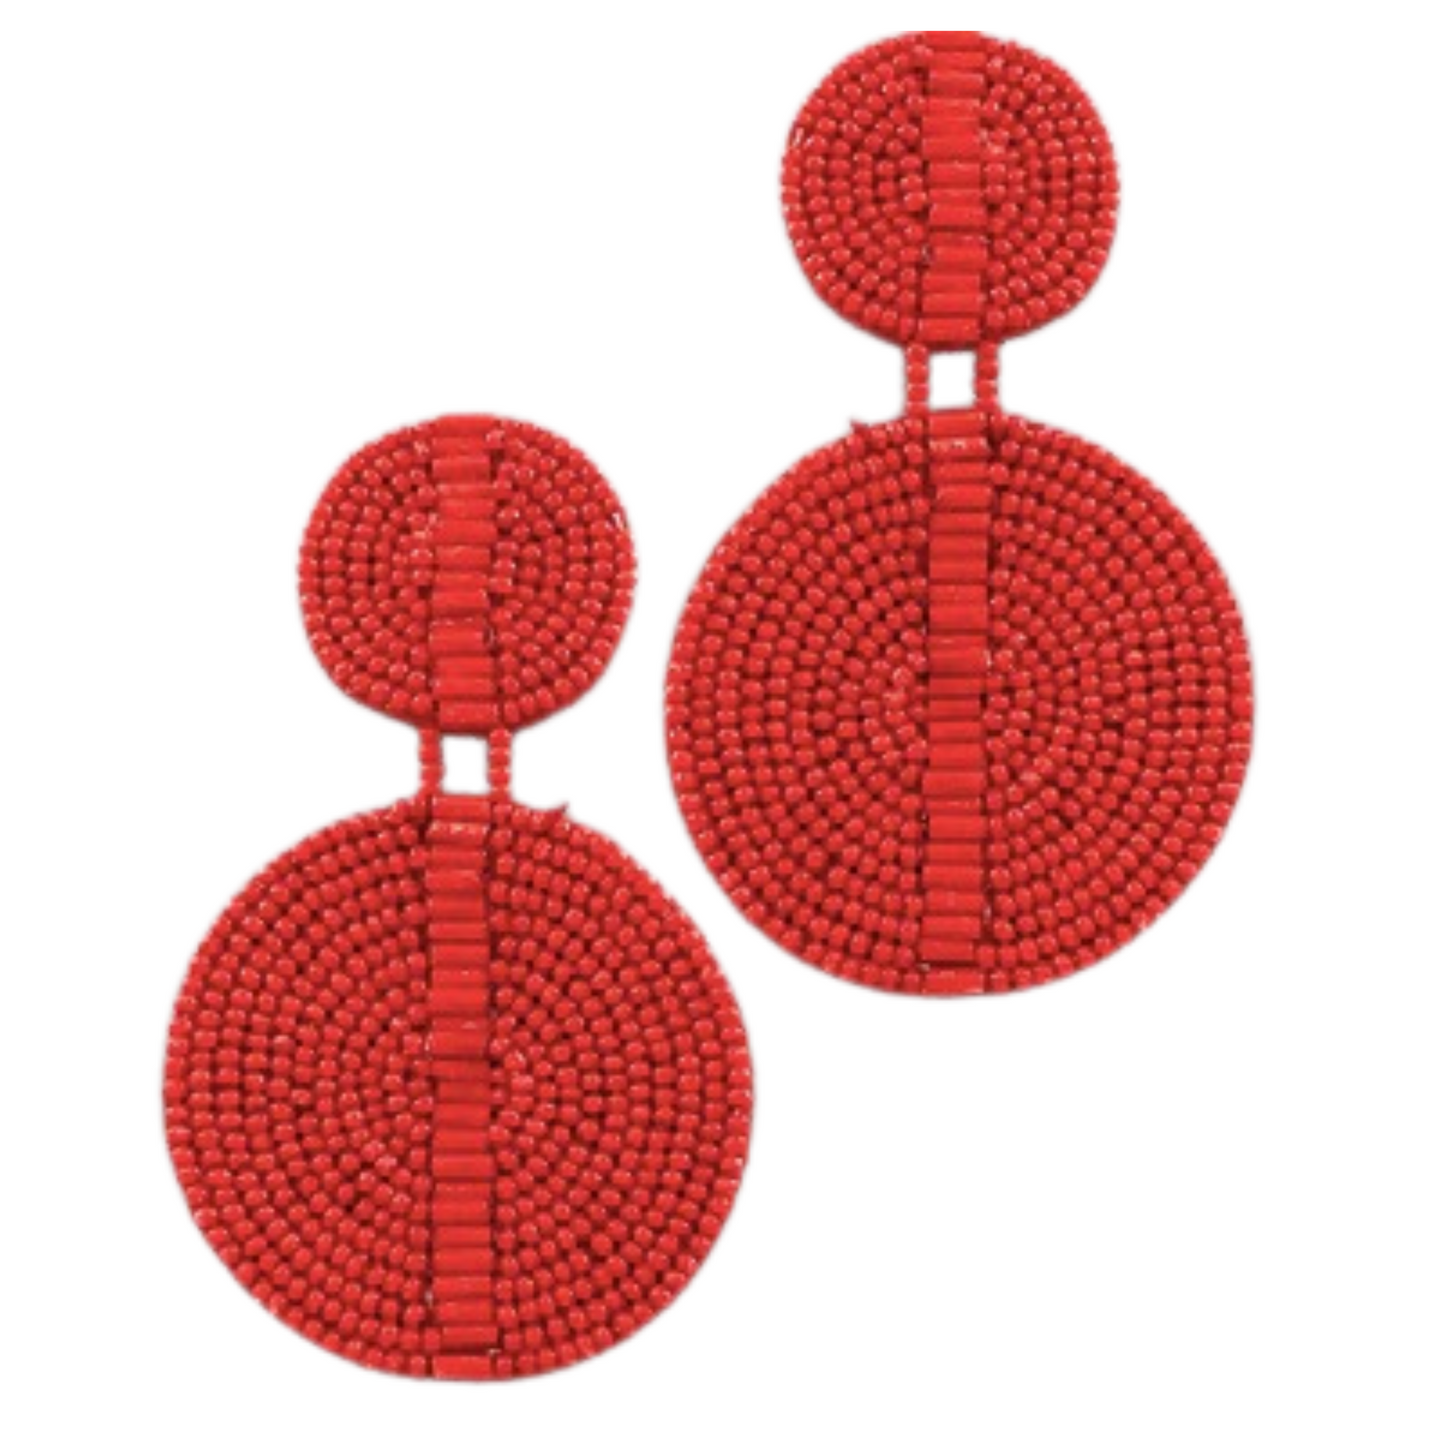 Expertly crafted with red beads, these dangle earrings feature a unique double disc design. The bold color adds a pop of vibrancy to any outfit, while the delicate beads add a touch of elegance. Elevate your style with these statement earrings that are sure to make you stand out.